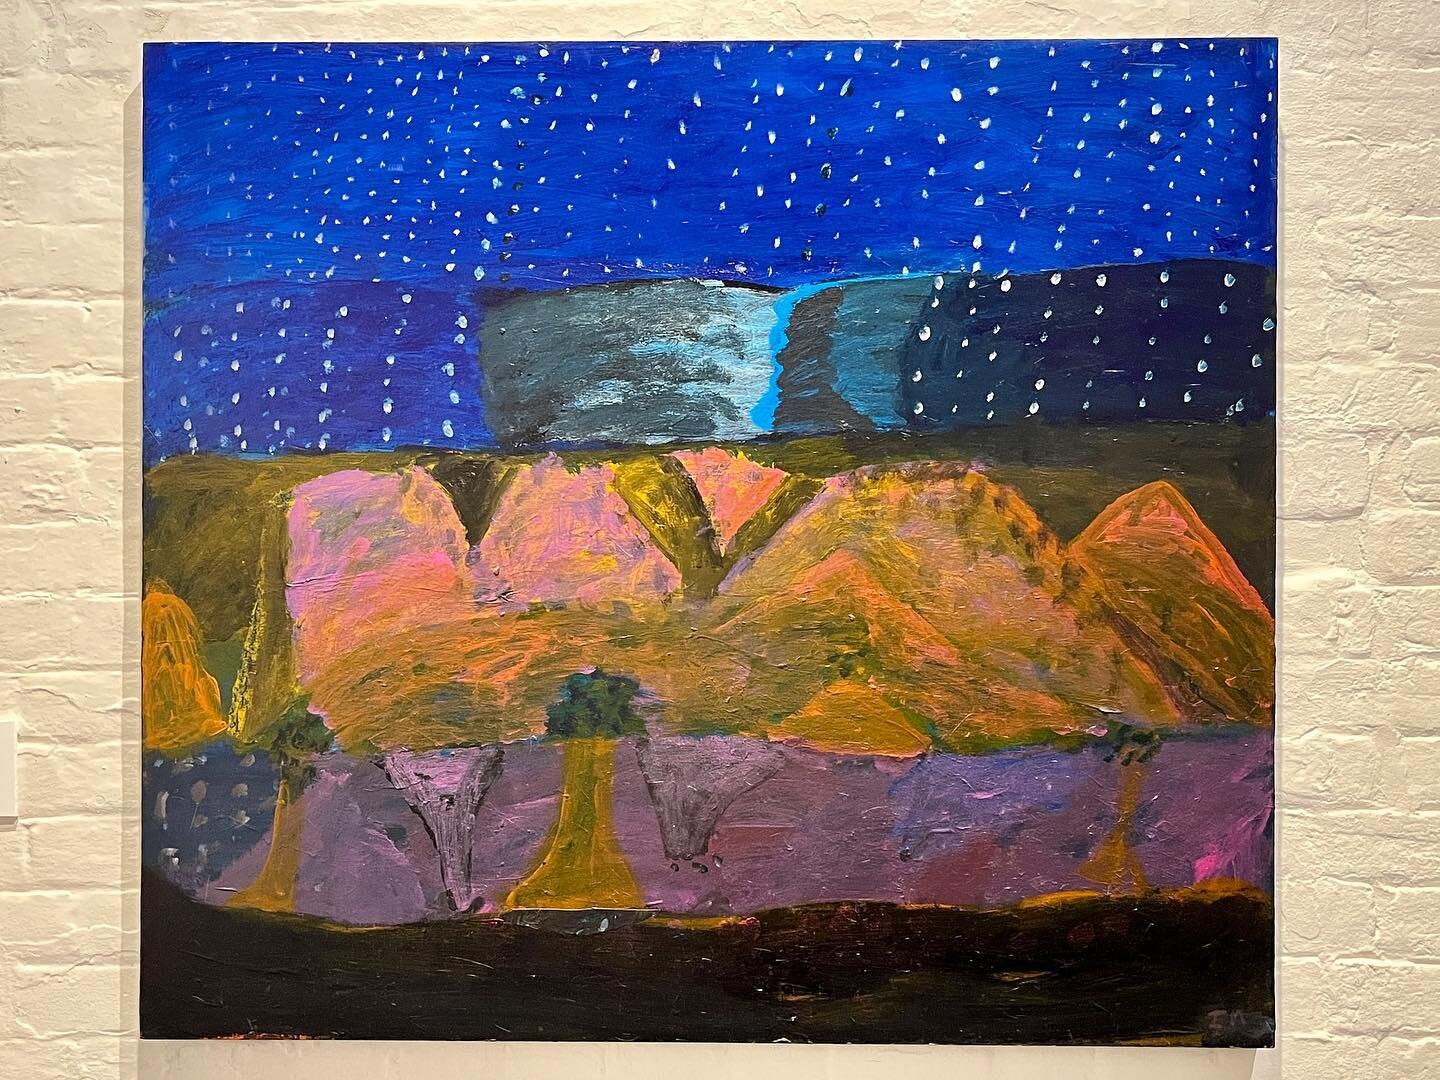 Idris Murphy: master of the grid, alternative viewpoints, metallic-charged colour ☆

Idris was one of my first teachers at COFA (UNSW) back in the early 1990&rsquo;s. I trace my fascination for landscape painting back a long way but credit his infect